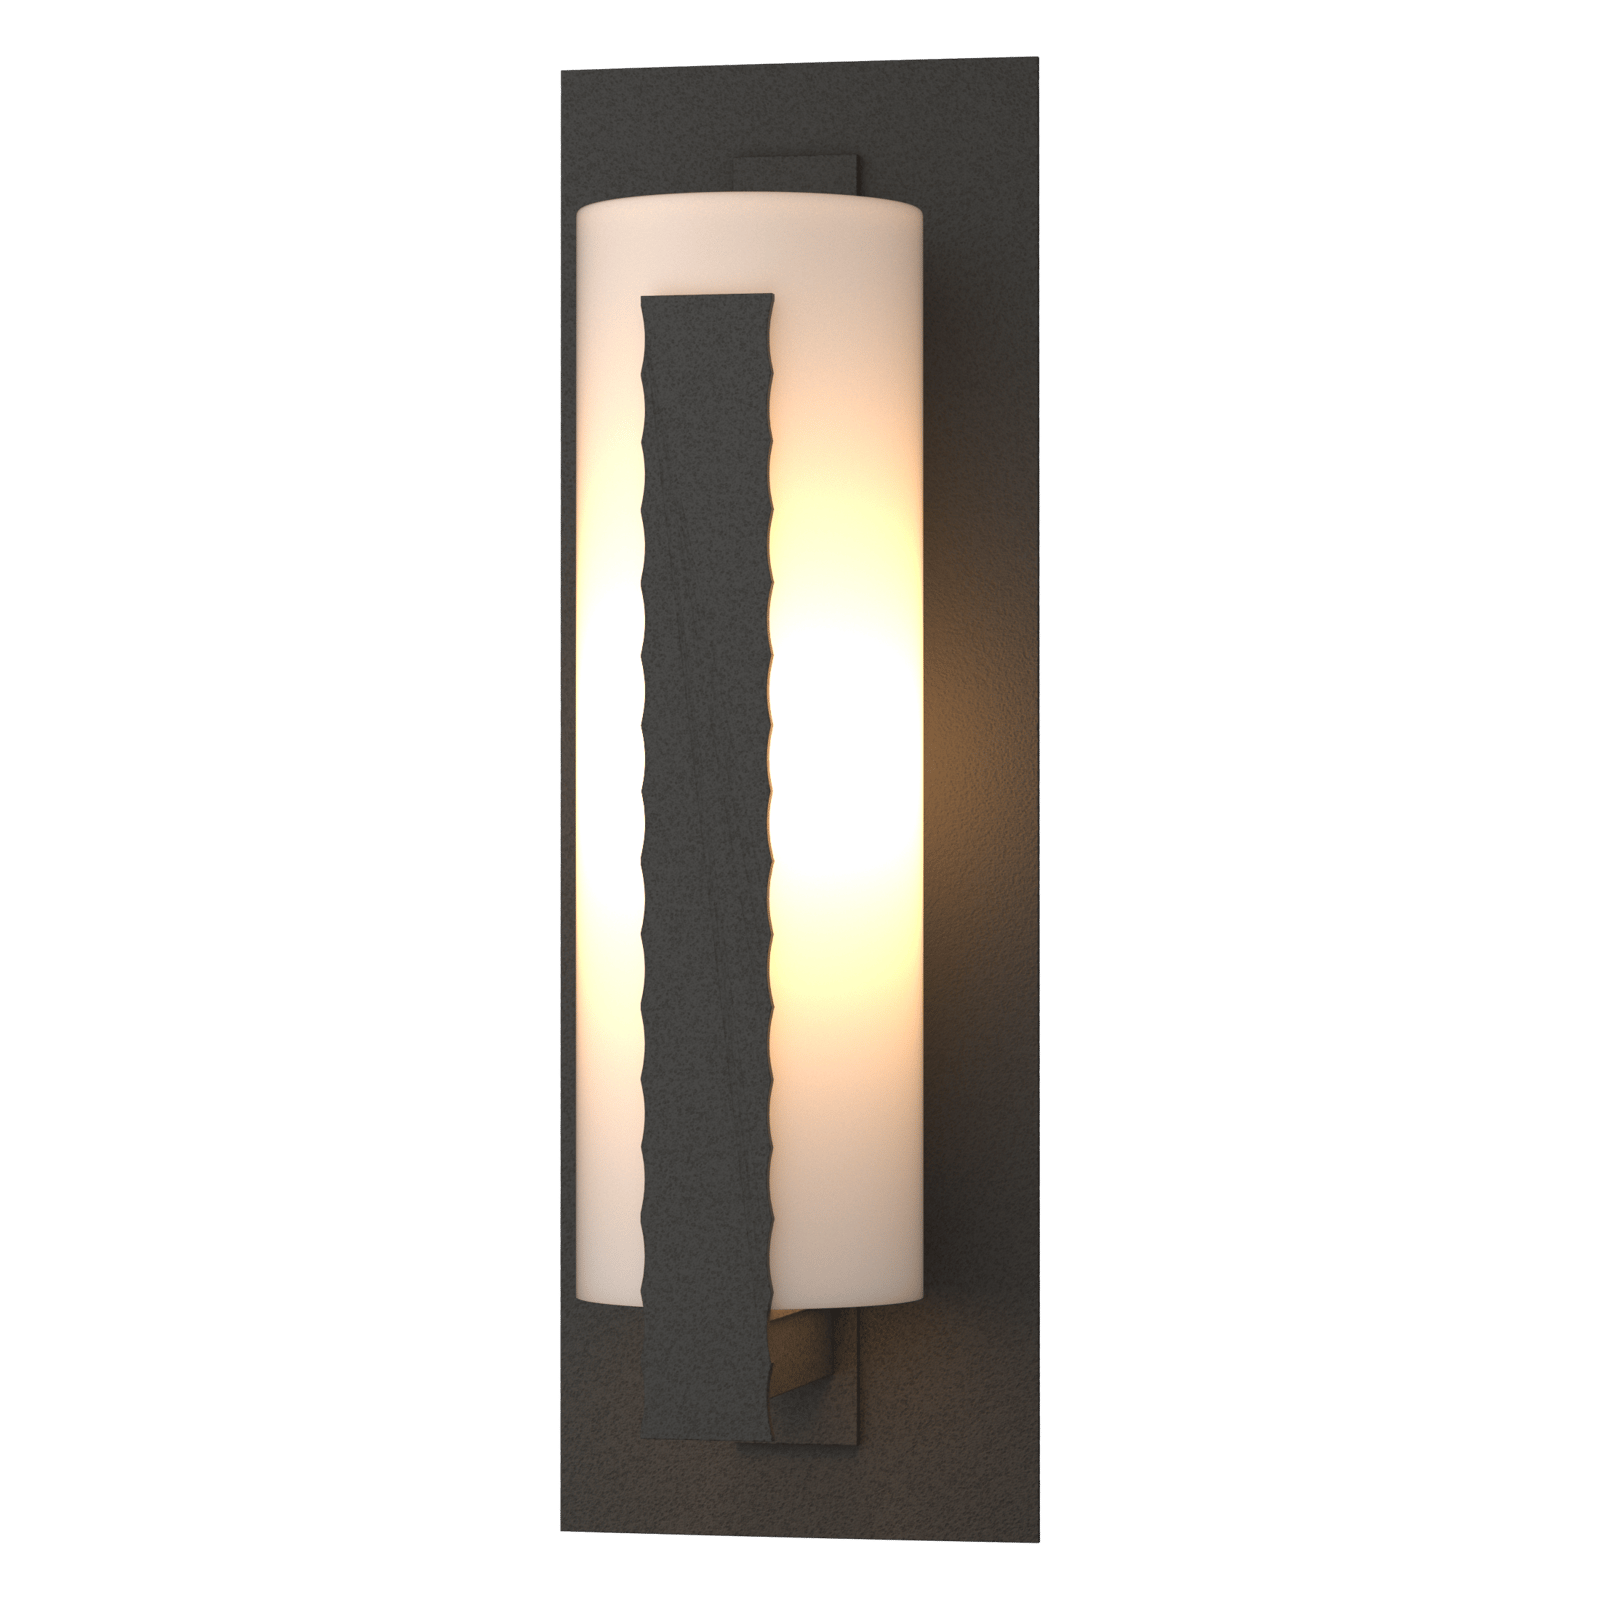 Hubbardton Forge Forged Vertical Bars Large Outdoor Sconce Outdoor l Wall Hubbardton Forge Coastal Natural Iron Opal Glass (GG) 